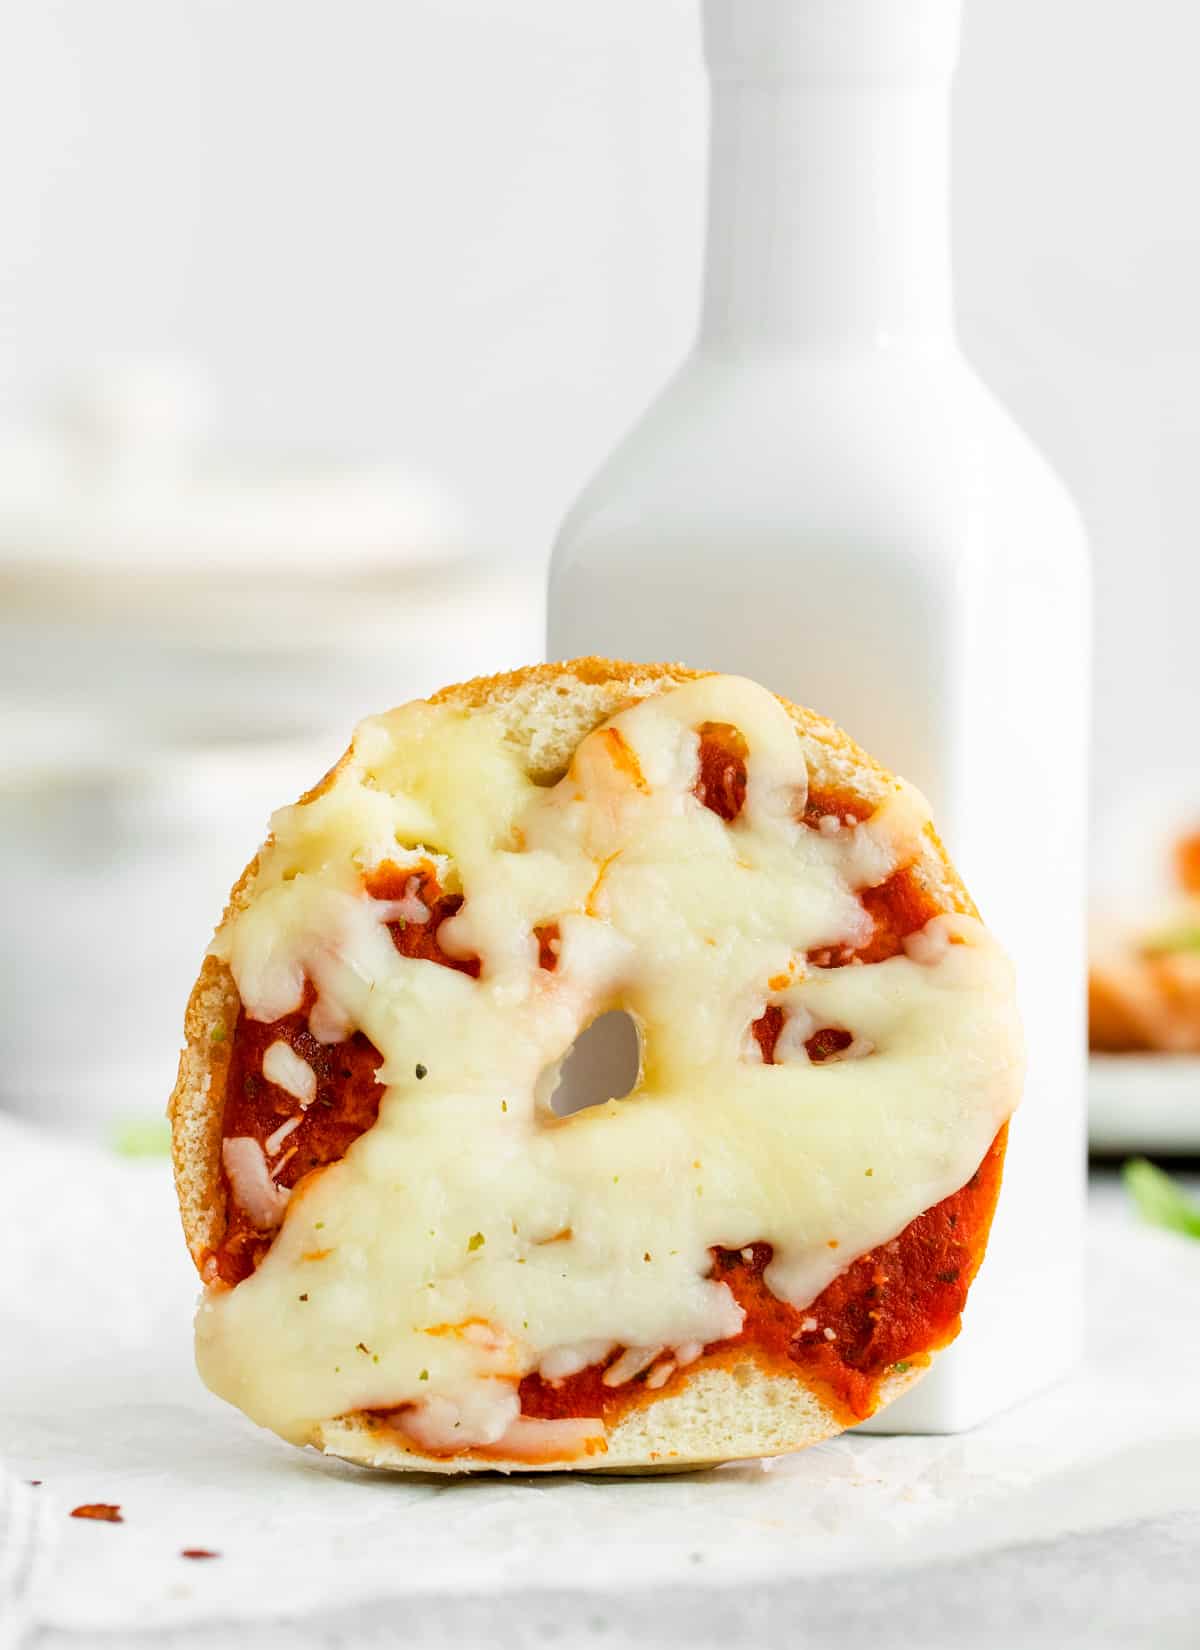 On of the finished Mini Pizza Bagels on parchment paper propped up on white container showing melted cheese.